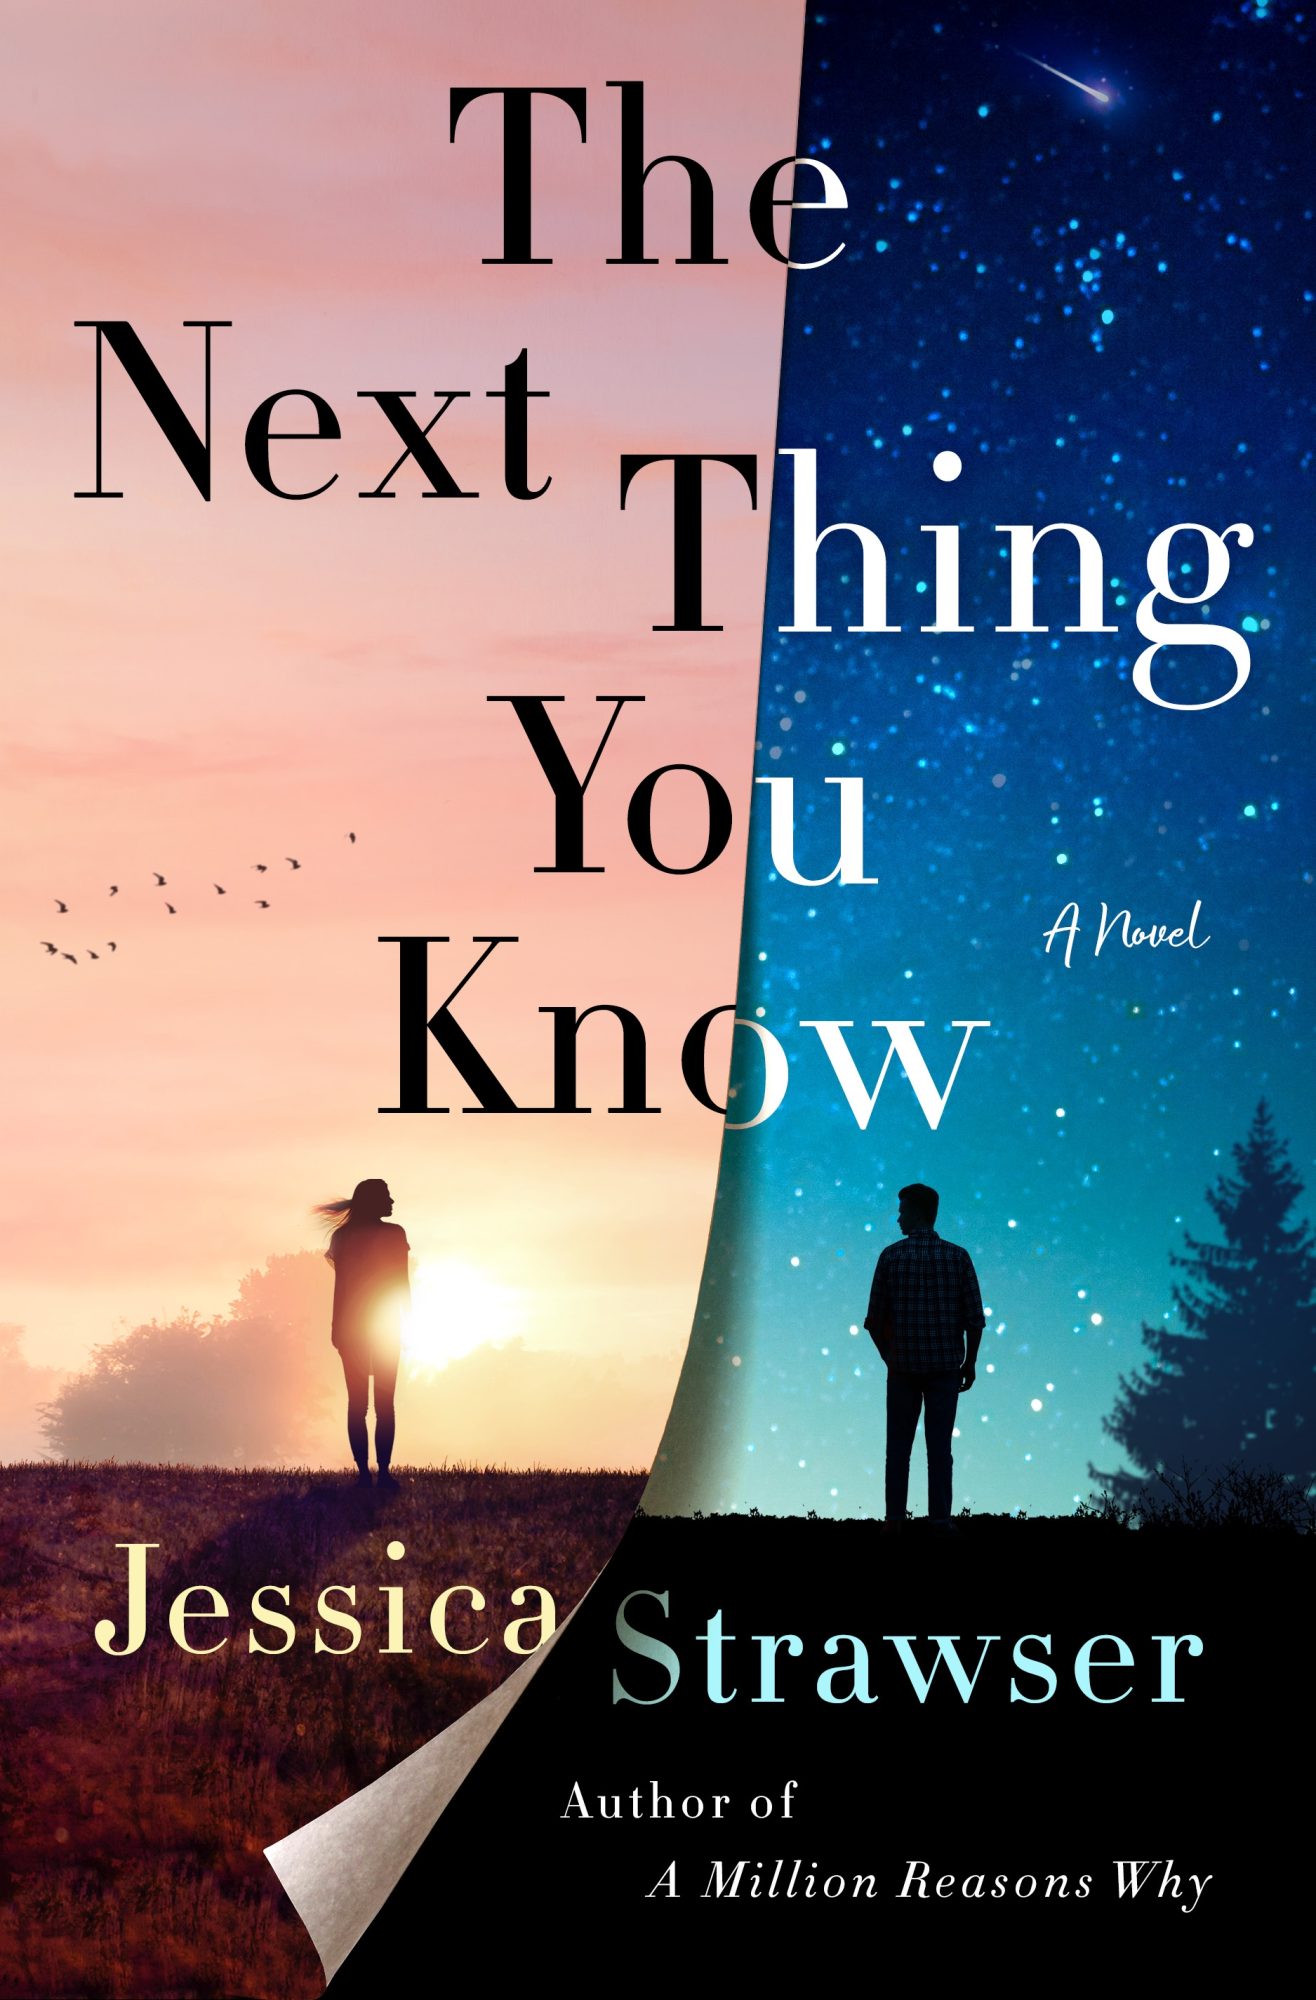 The Next Thing You Know: A Novel